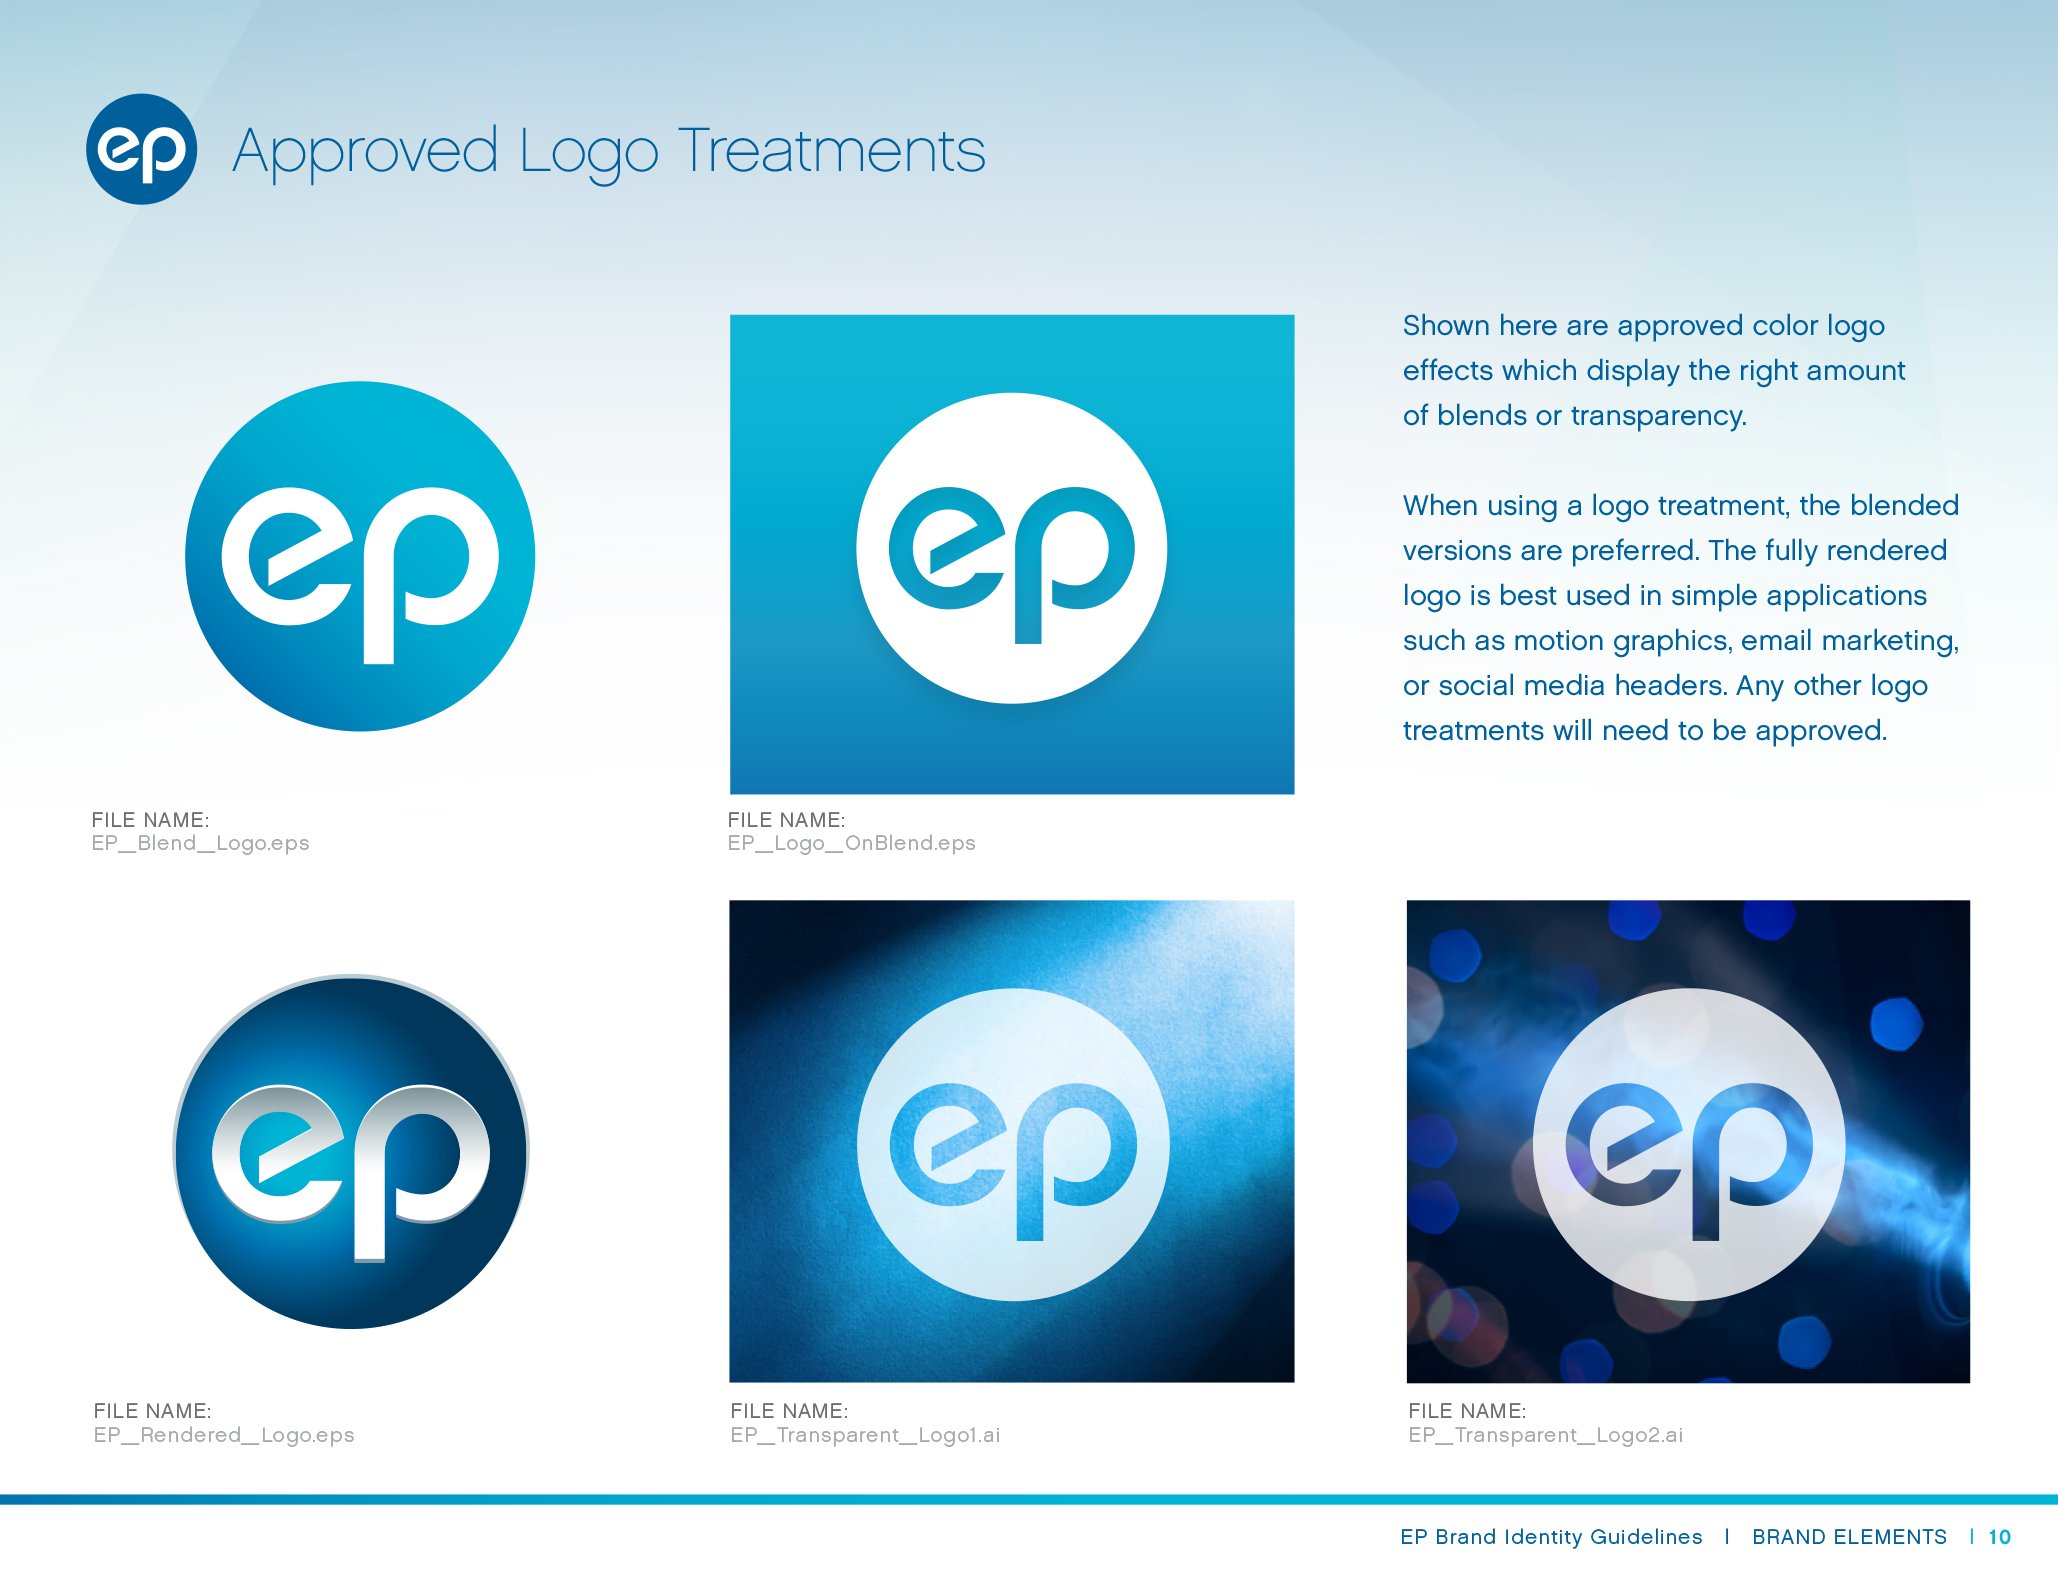 EP Entertainment Partners Brand Identity and UX Design Logo Treatments